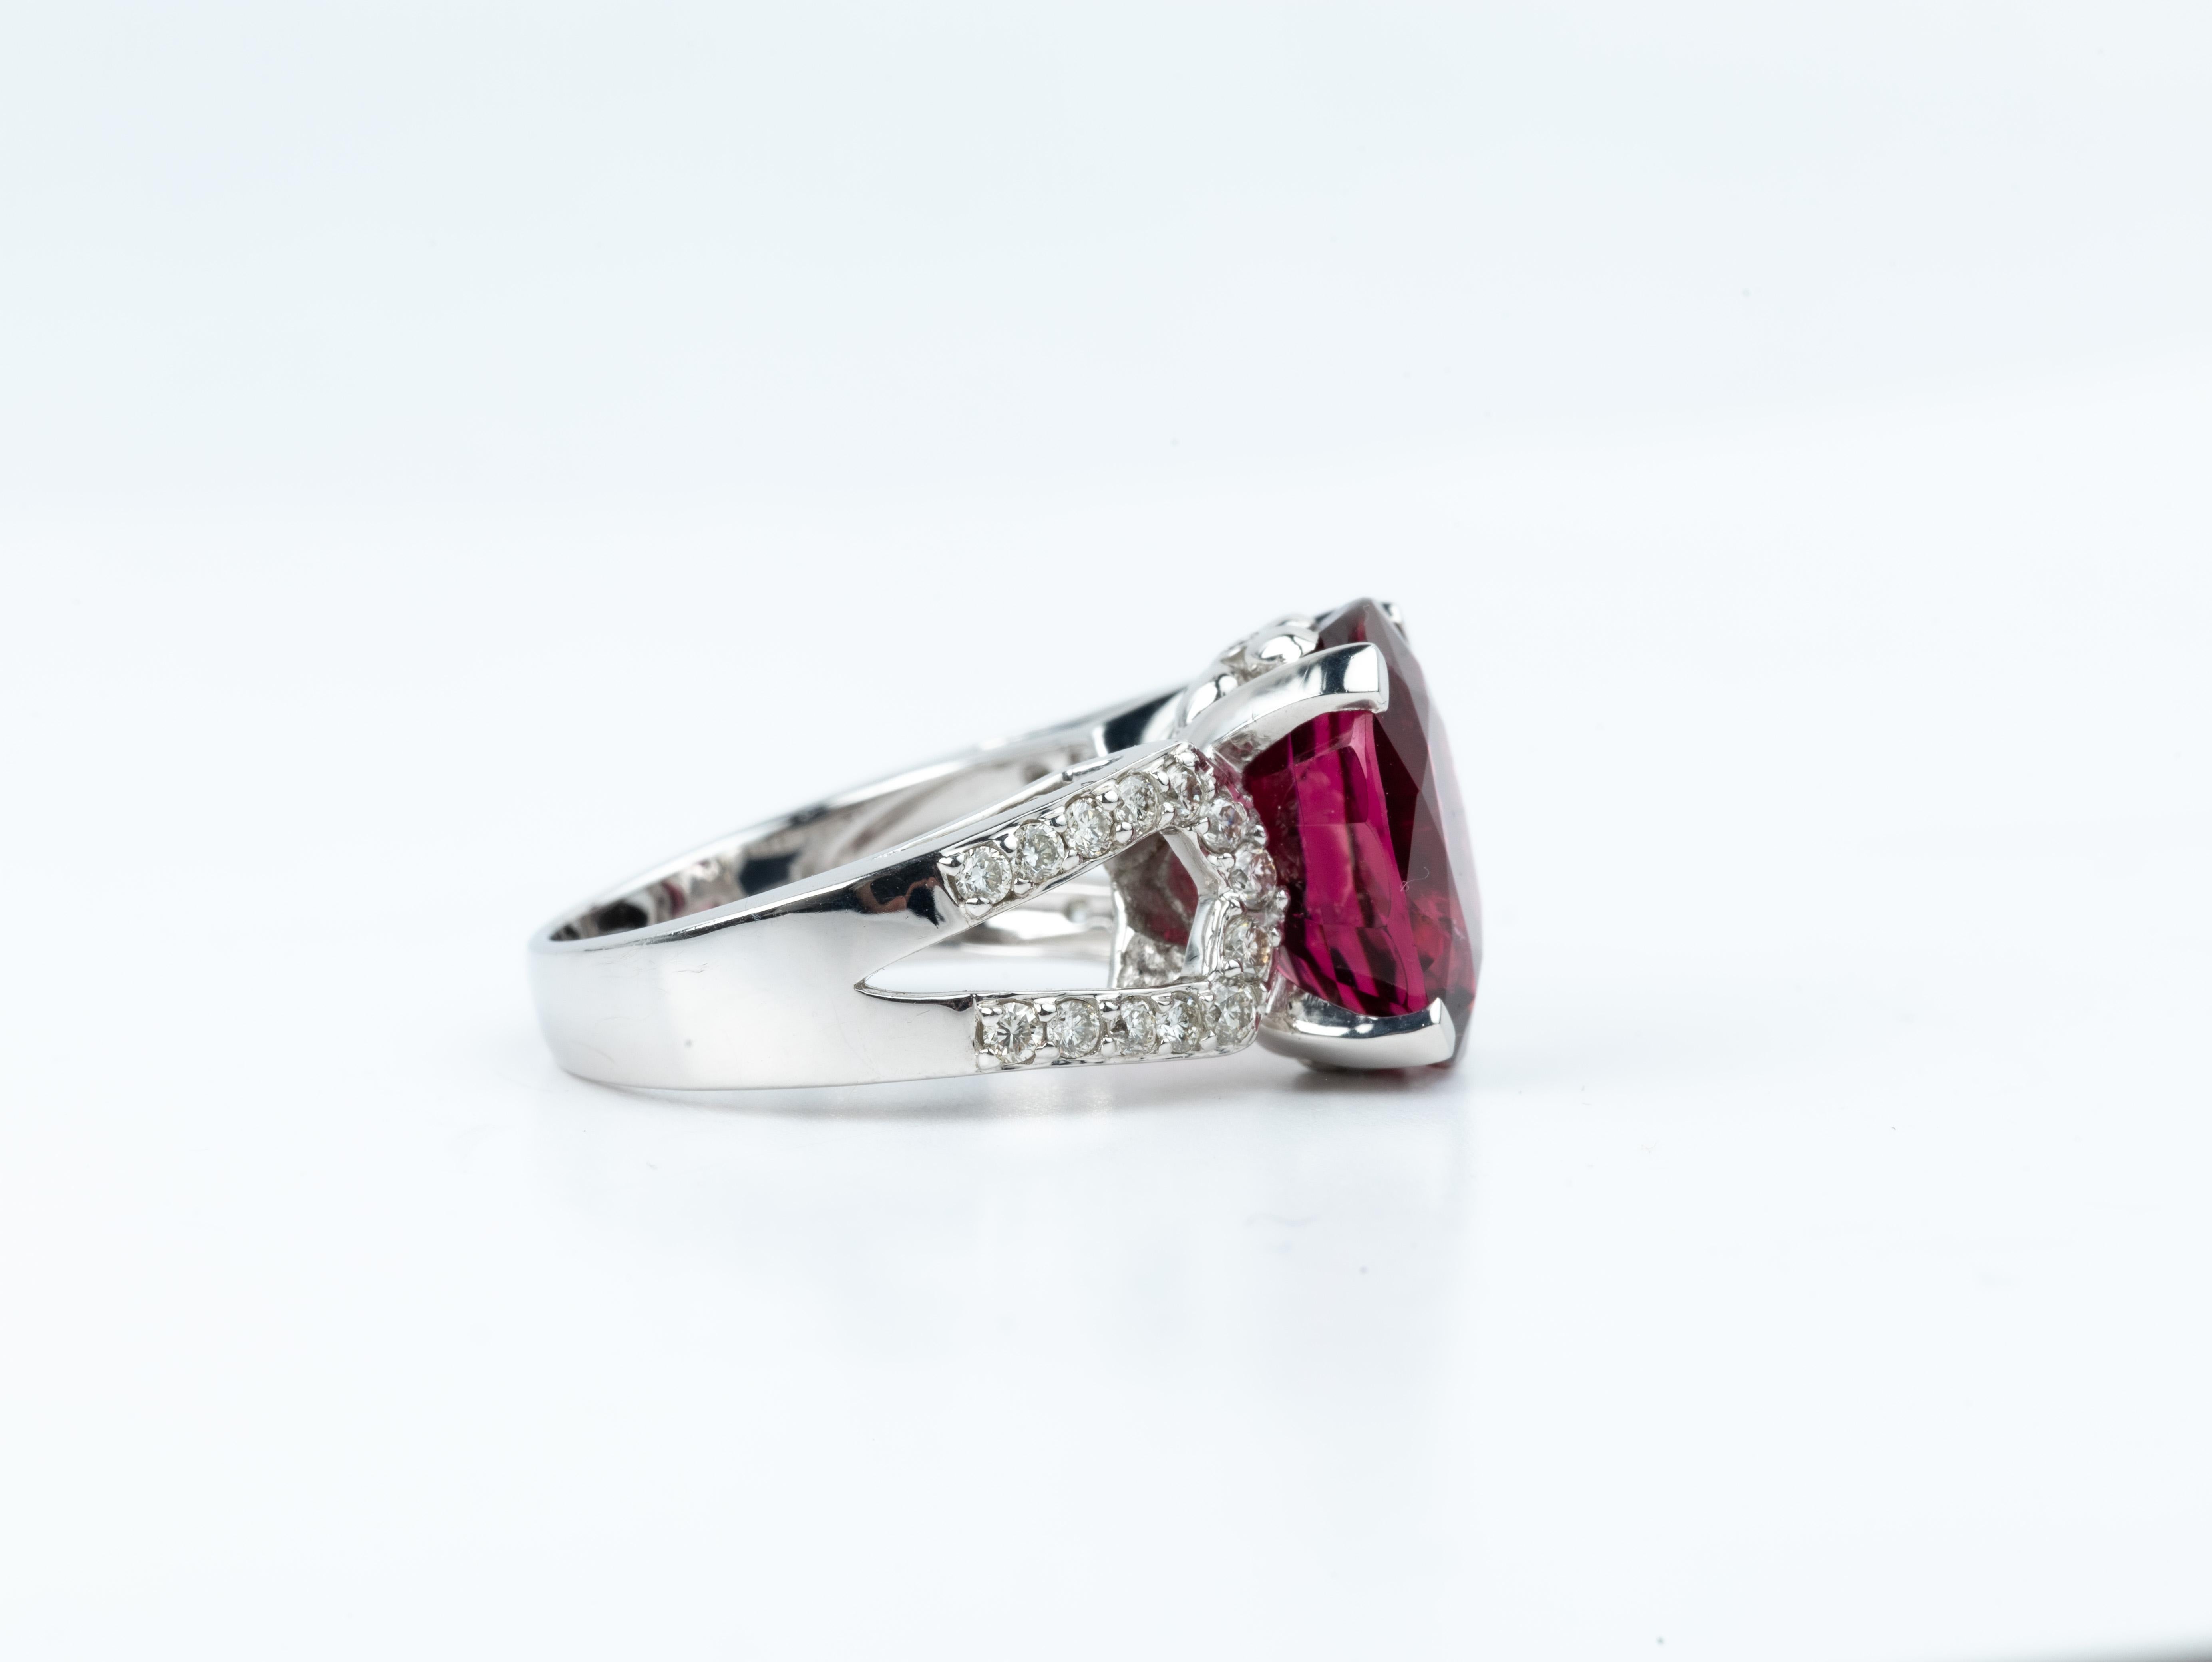 8 carat Oval Cut Rubellite Tourmaline With 1ct Diamonds Cocktail Ring 18k White

Available in 18k White gold.

Same design can be made also with other custom gemstones per request.

Product details:

- Solid gold 8.5 grams

- Side diamond - approx.